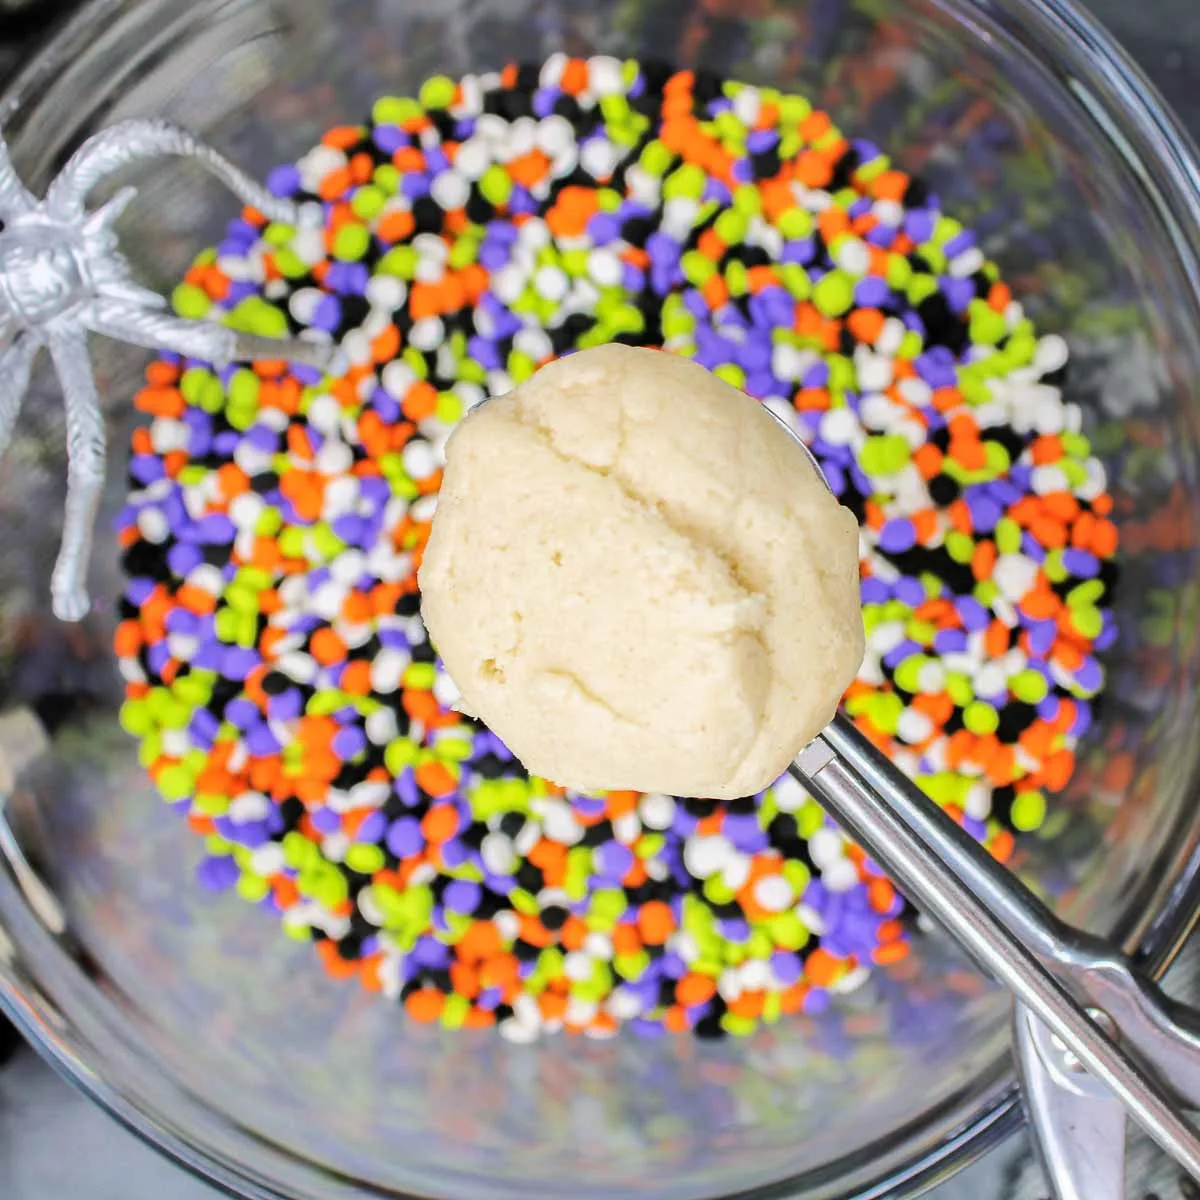 Adding a scoop of cookie dough into the sprinkles.